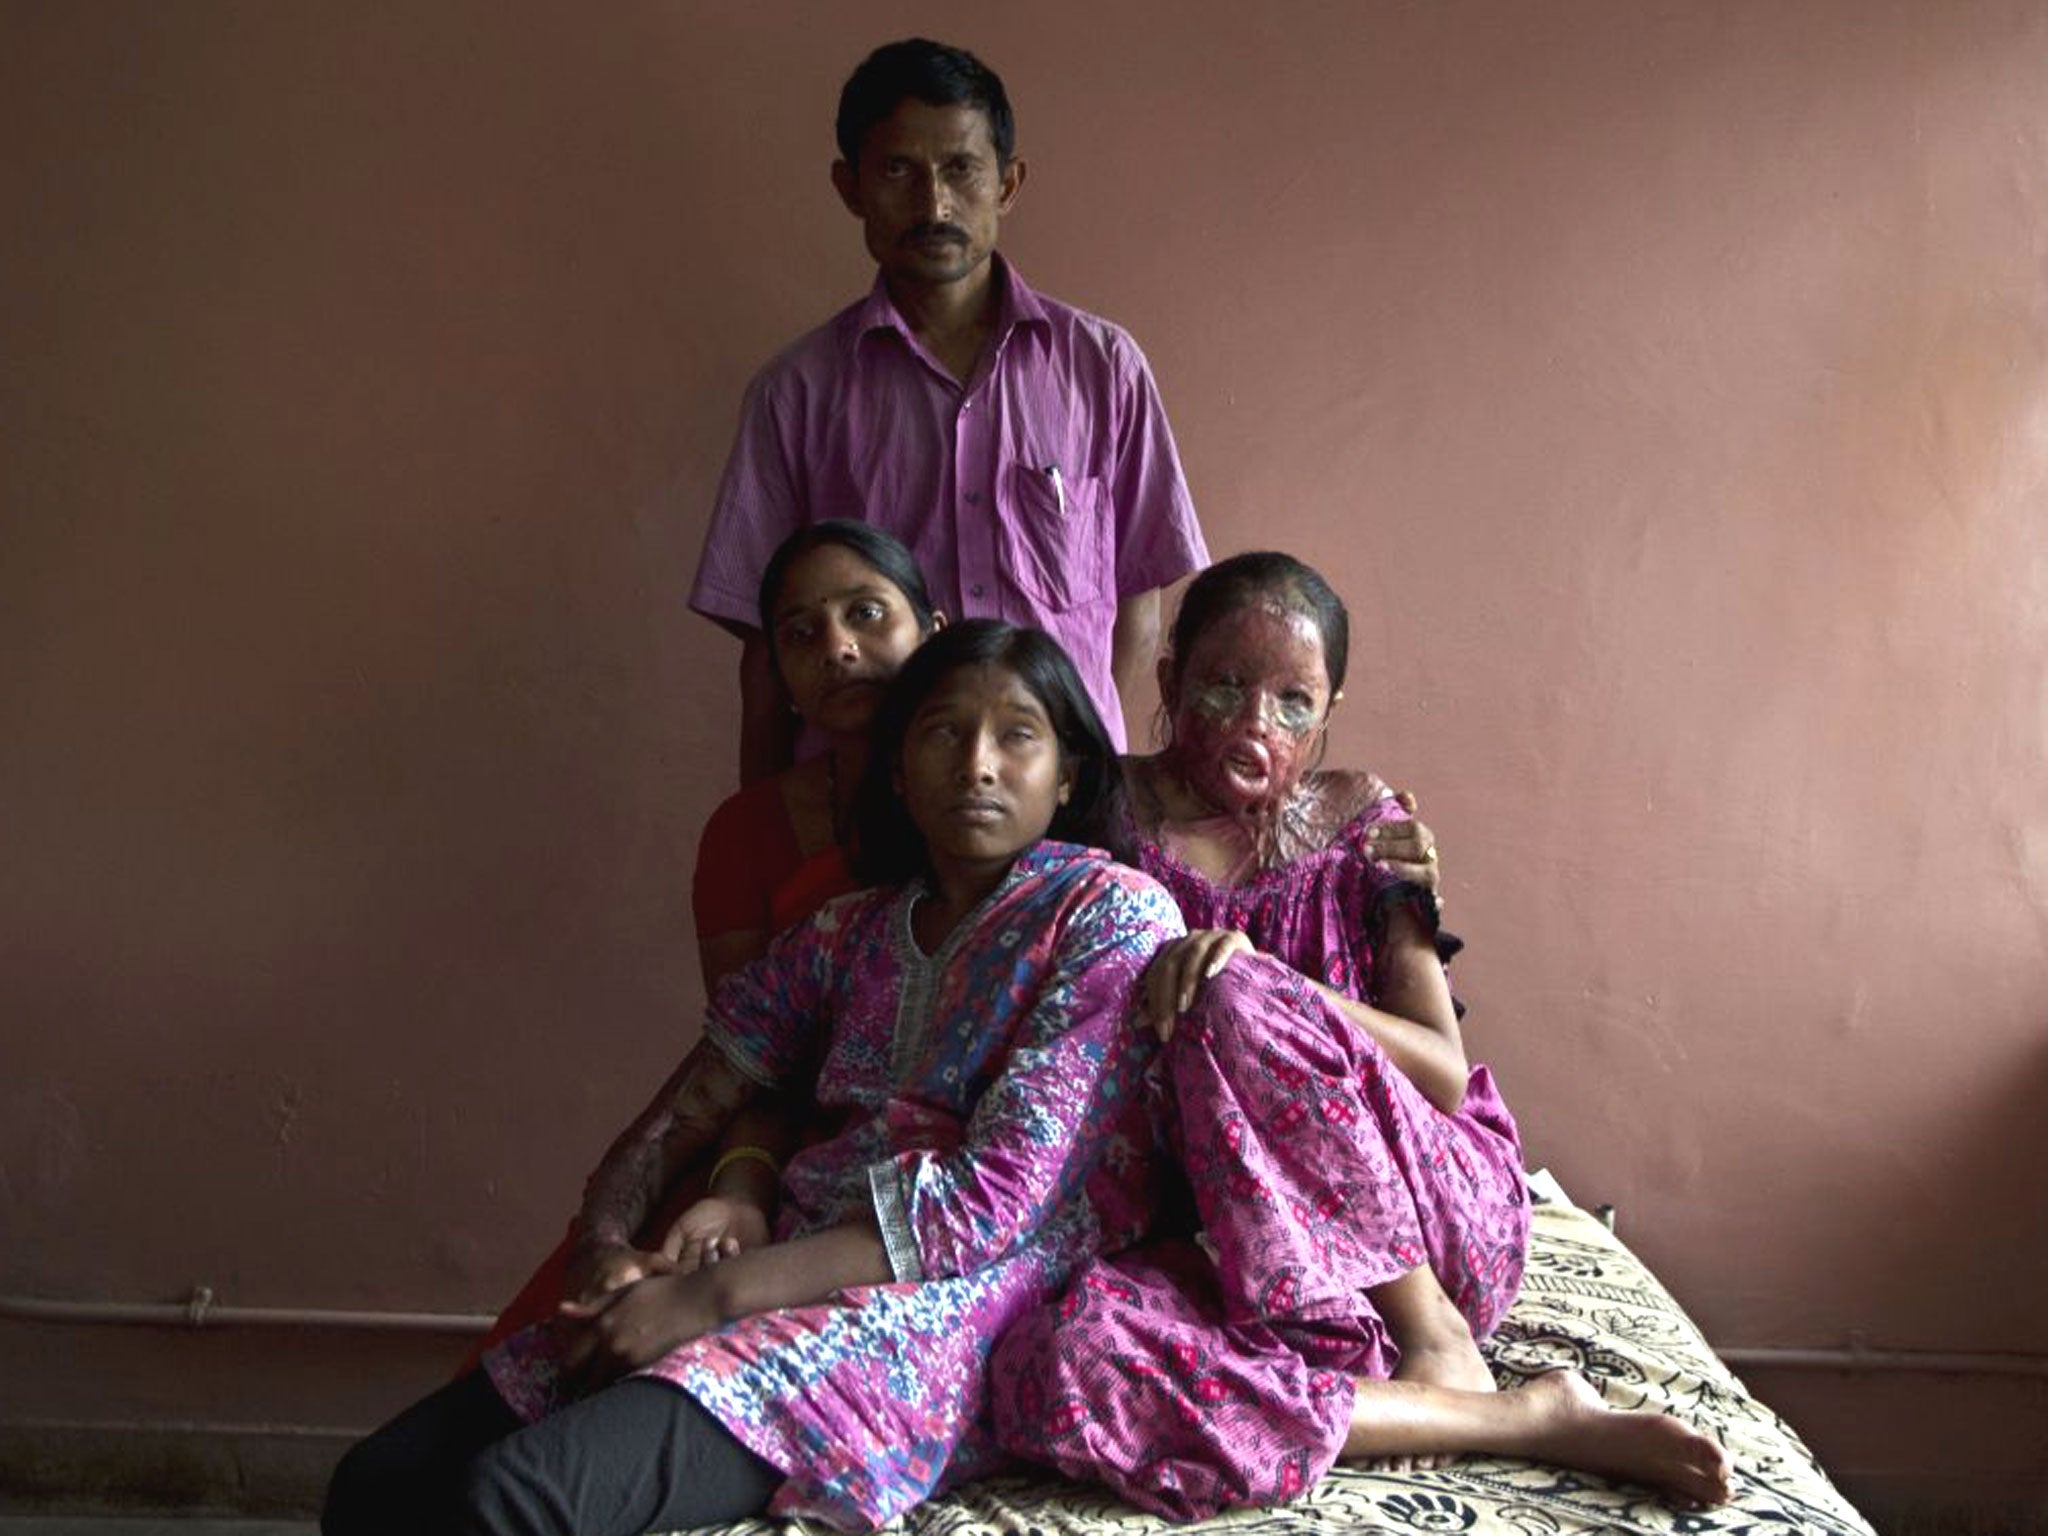 Chanchal and her family mother Sunaina, sister Sonam and father Sailish on bed at Dharamshala in New Delhi